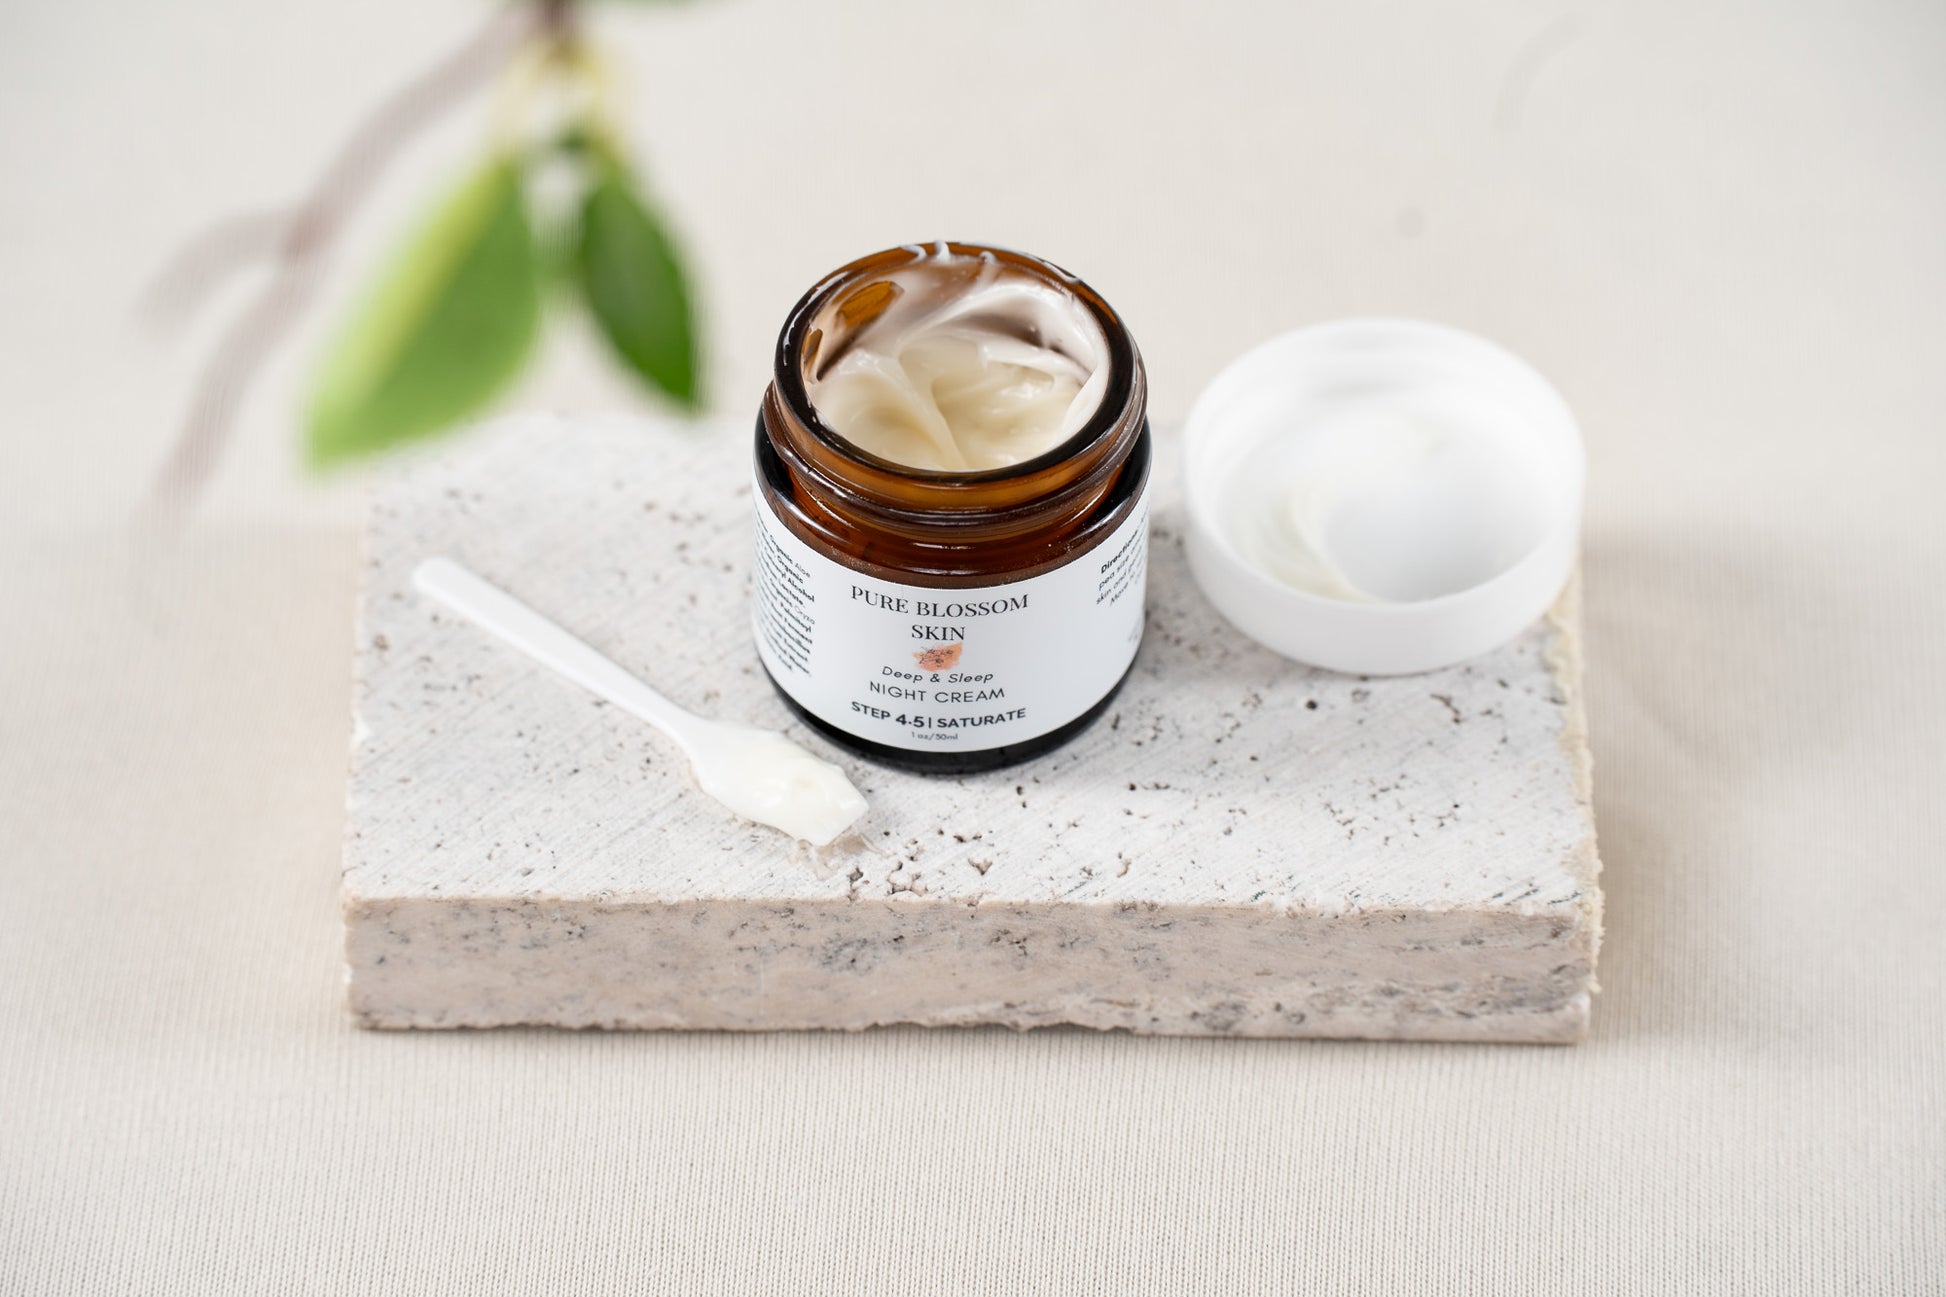 Looking at open 1oz amber glass jar of Deep & Sleep NIGHT CREAM, with lid off next to jar. Jar filled with rich, decadent looking face cream | Pure Blossom Skin